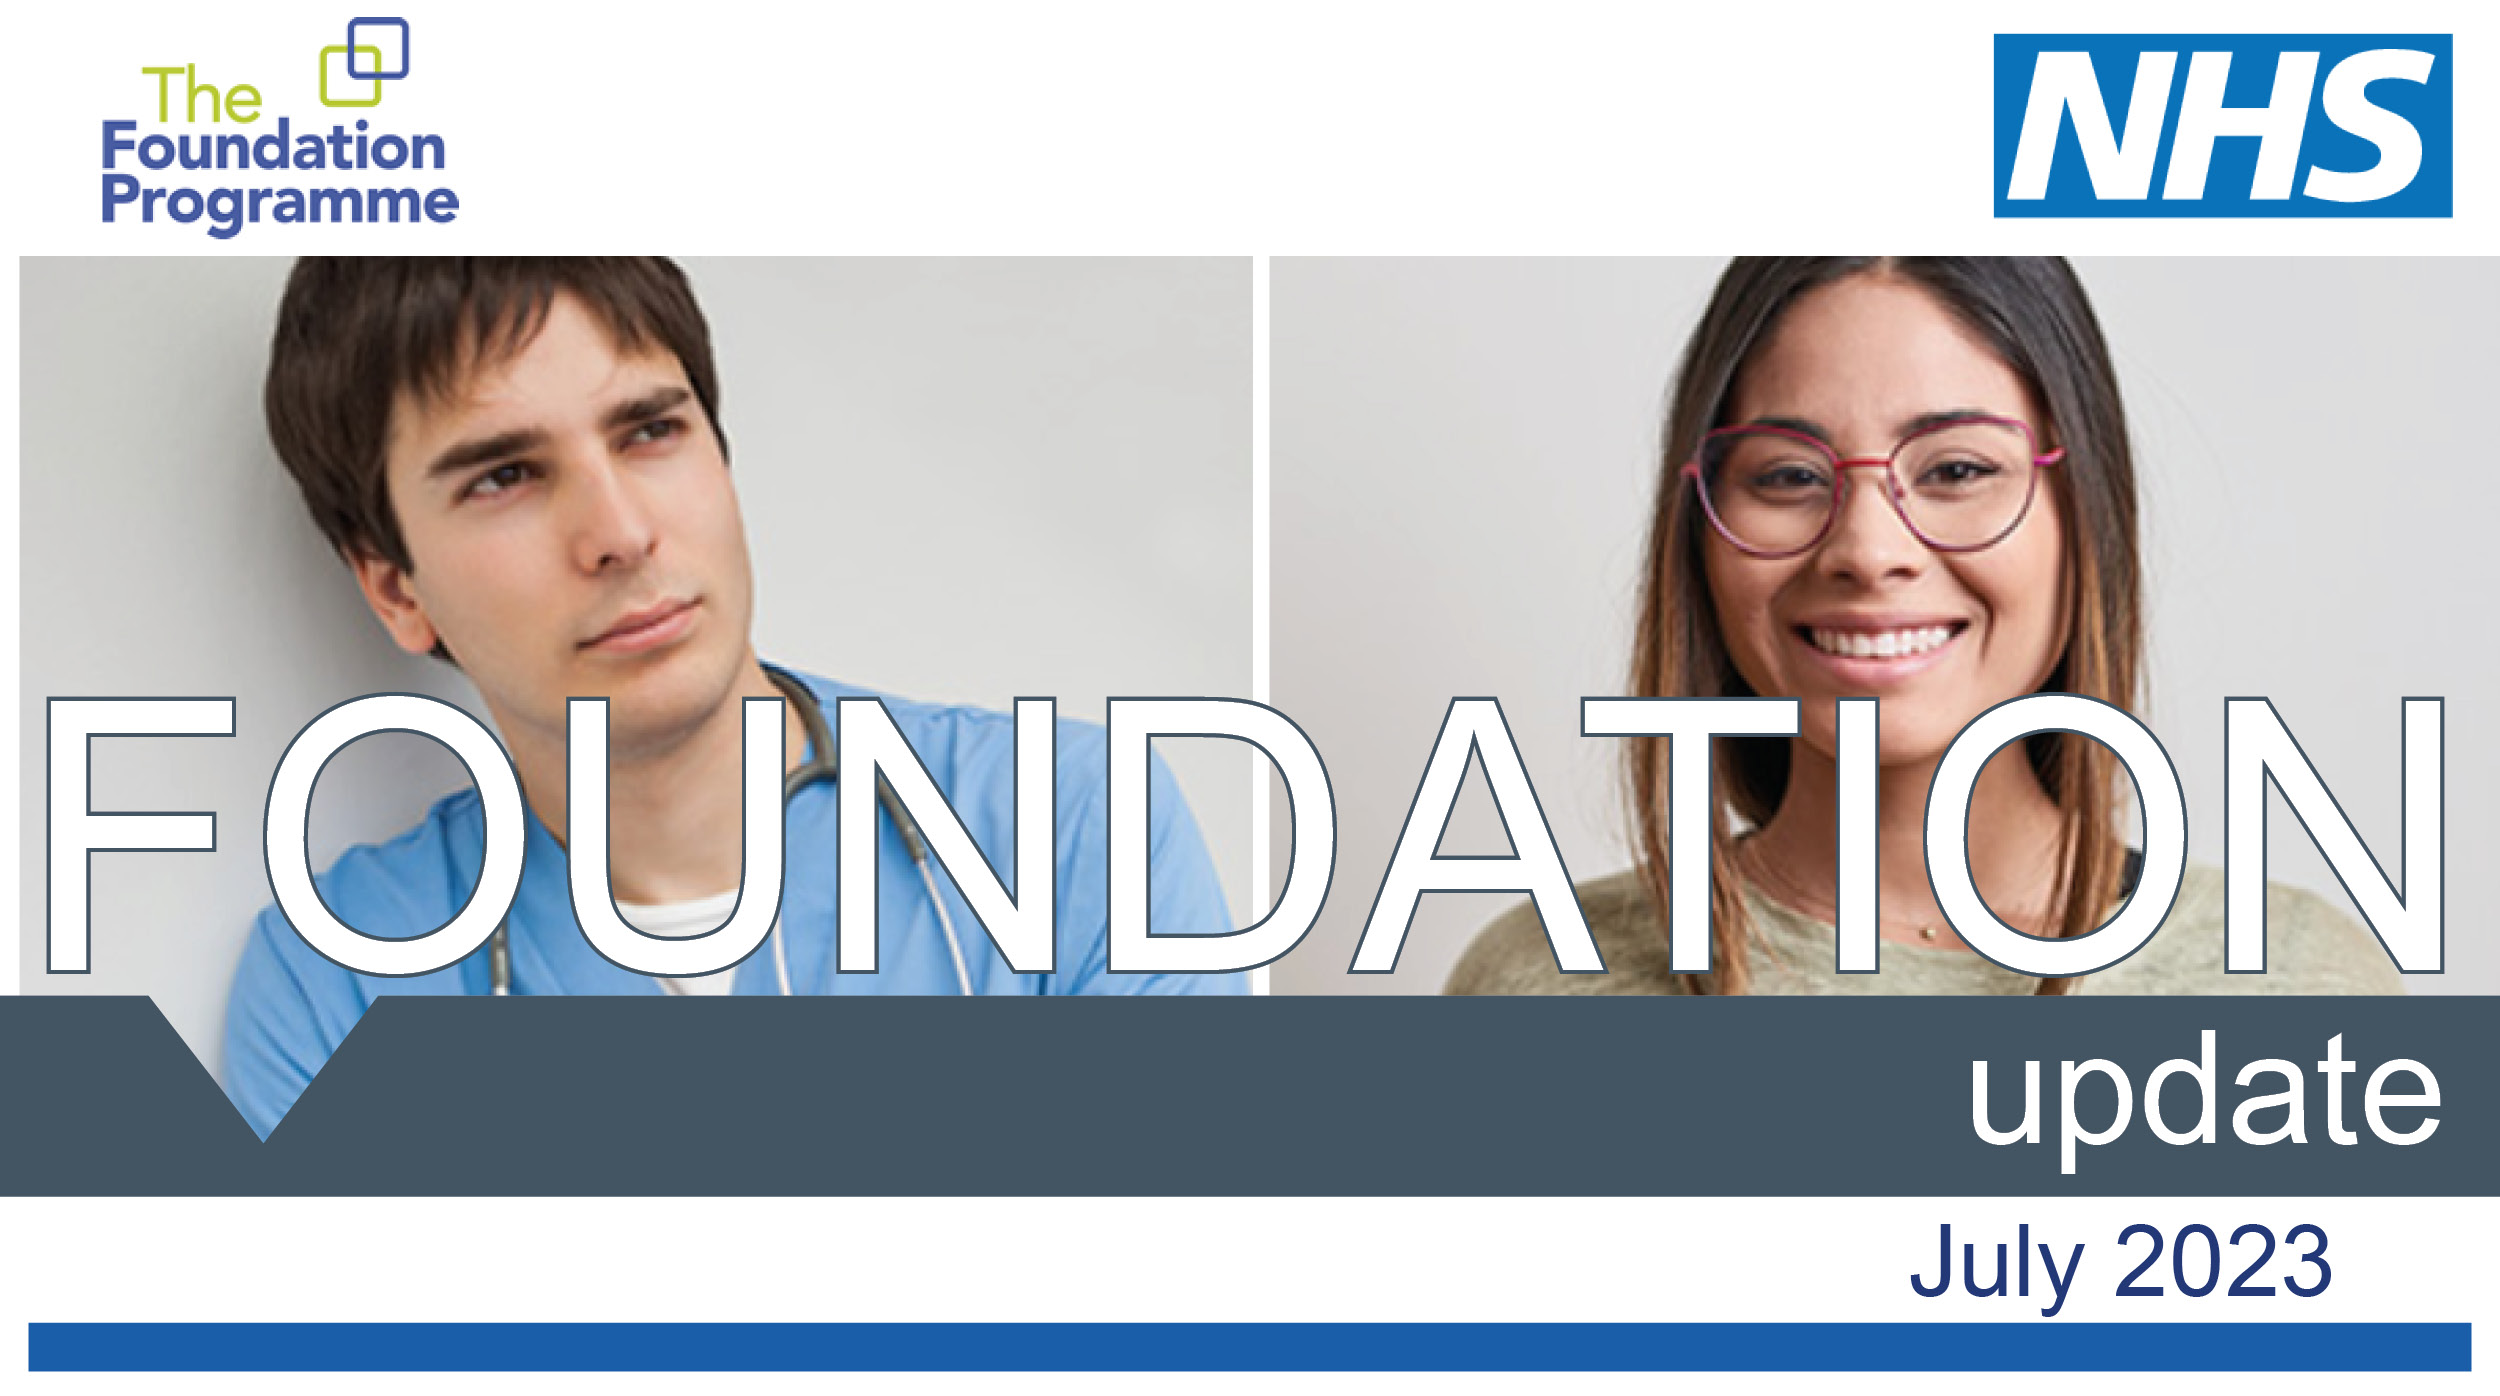 Young male and female staff smile, with text: Foundation Update July 20223